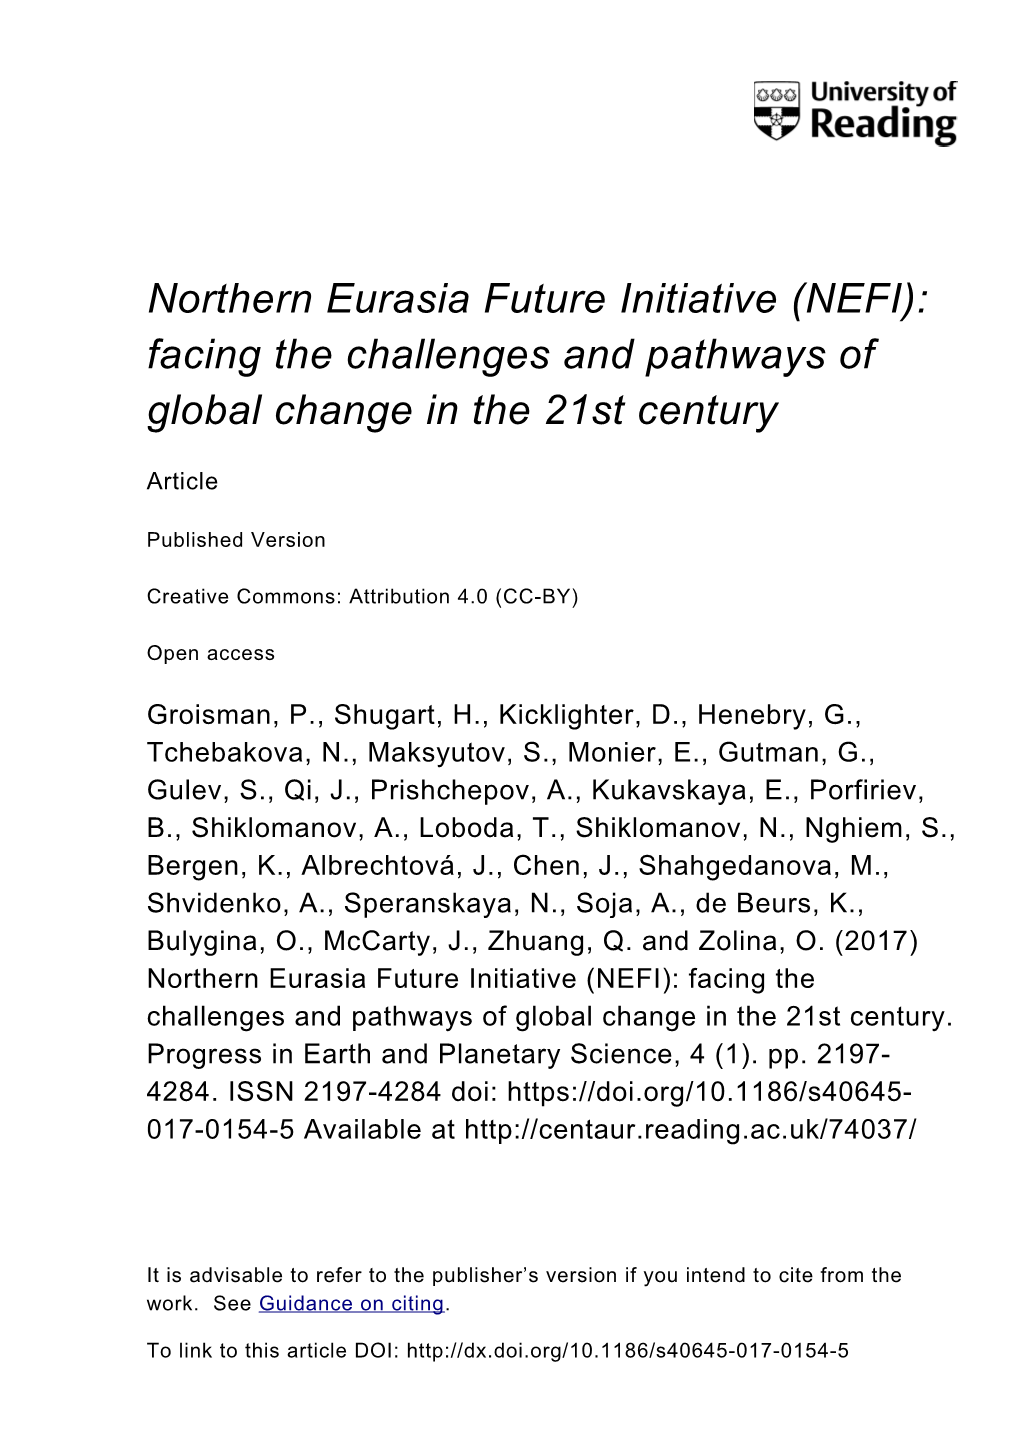 Northern Eurasia Future Initiative (NEFI): Facing the Challenges and Pathways of Global Change in the 21St Century